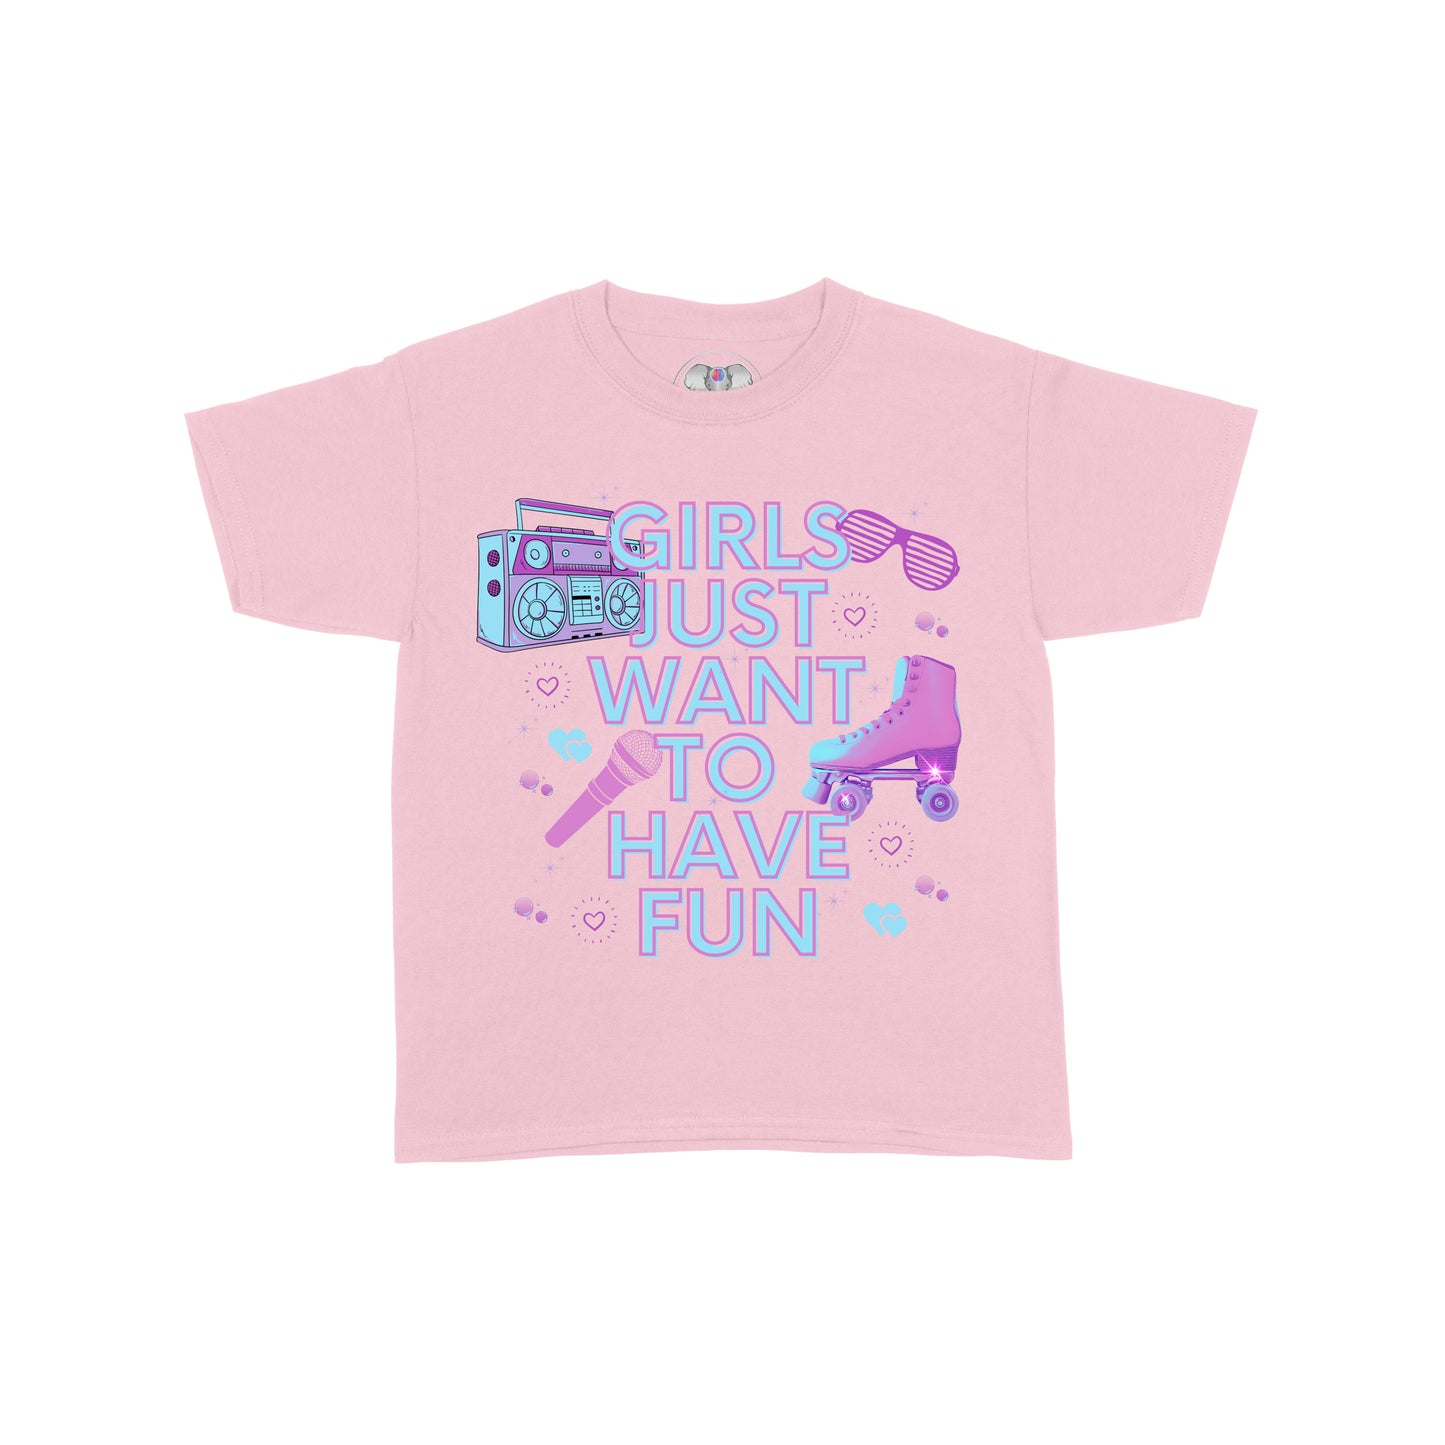 Girls Just Want To Have Fun Graphic T-shirt